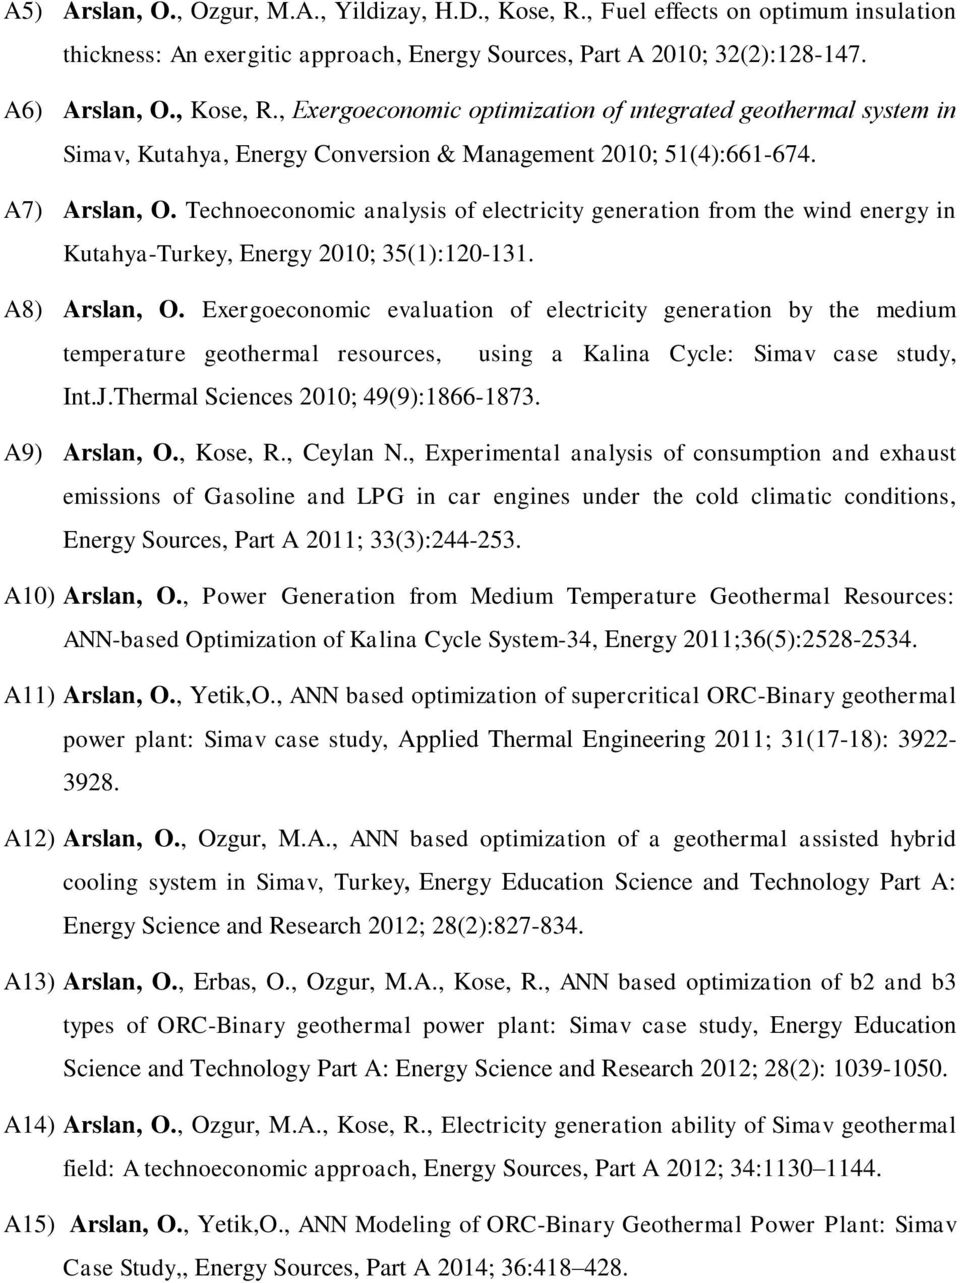 Exergoeconomic evaluation of electricity generation by the medium temperature geothermal resources, using a Kalina Cycle: Simav case study, Int.J.Thermal Sciences 2010; 49(9):1866-1873. A9) Arslan, O.